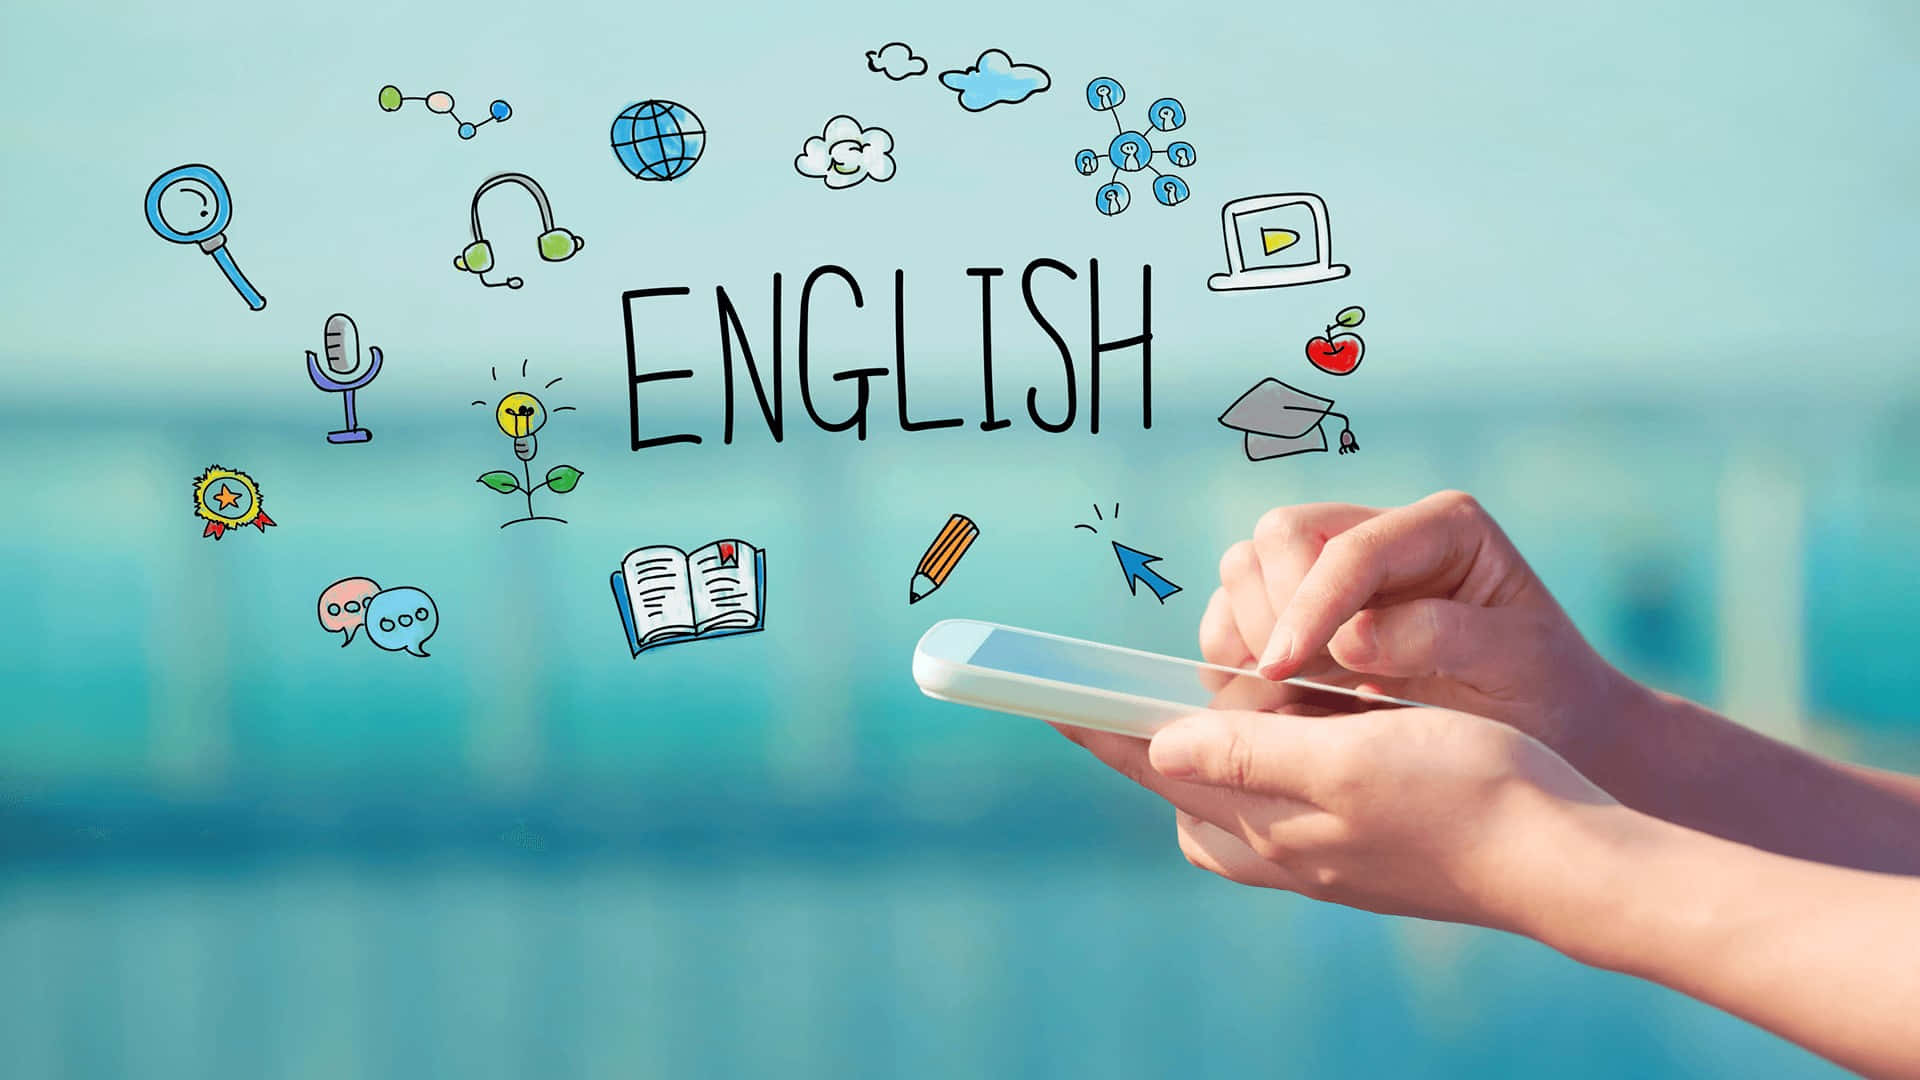 Learn the beauty of the English language Wallpaper